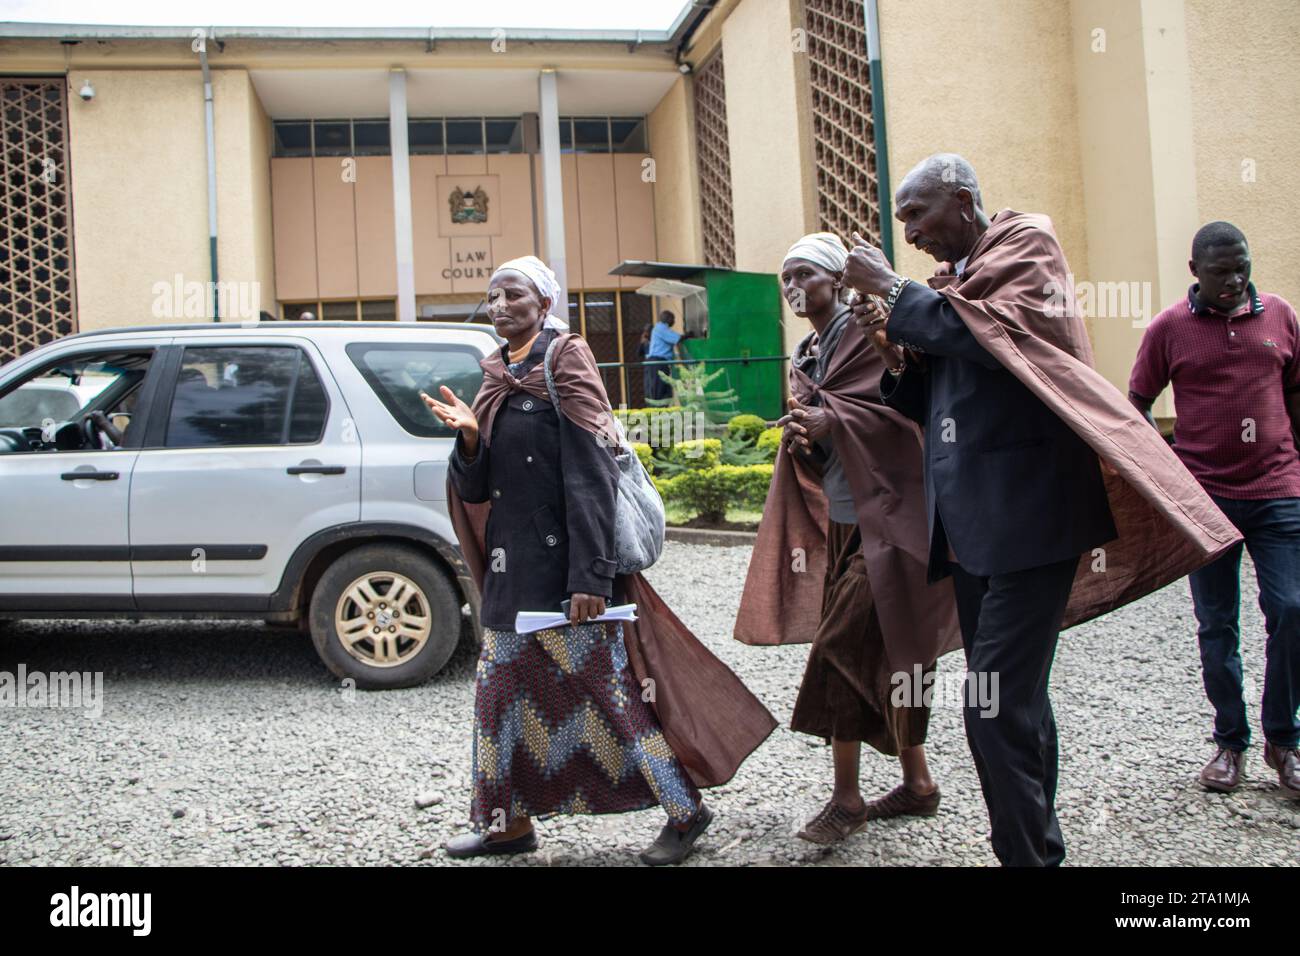 Members of the Ogiek Community leave Nakuru High Court after the mention of their application challenging The Kenyan Government’s attempt to displace them from The Mau Forest. The Ogiek, an indigenous forest-dwelling community, filed a lawsuit against the government last month, contesting the eviction from Mau Forest, a location they have called home for centuries. Stock Photo